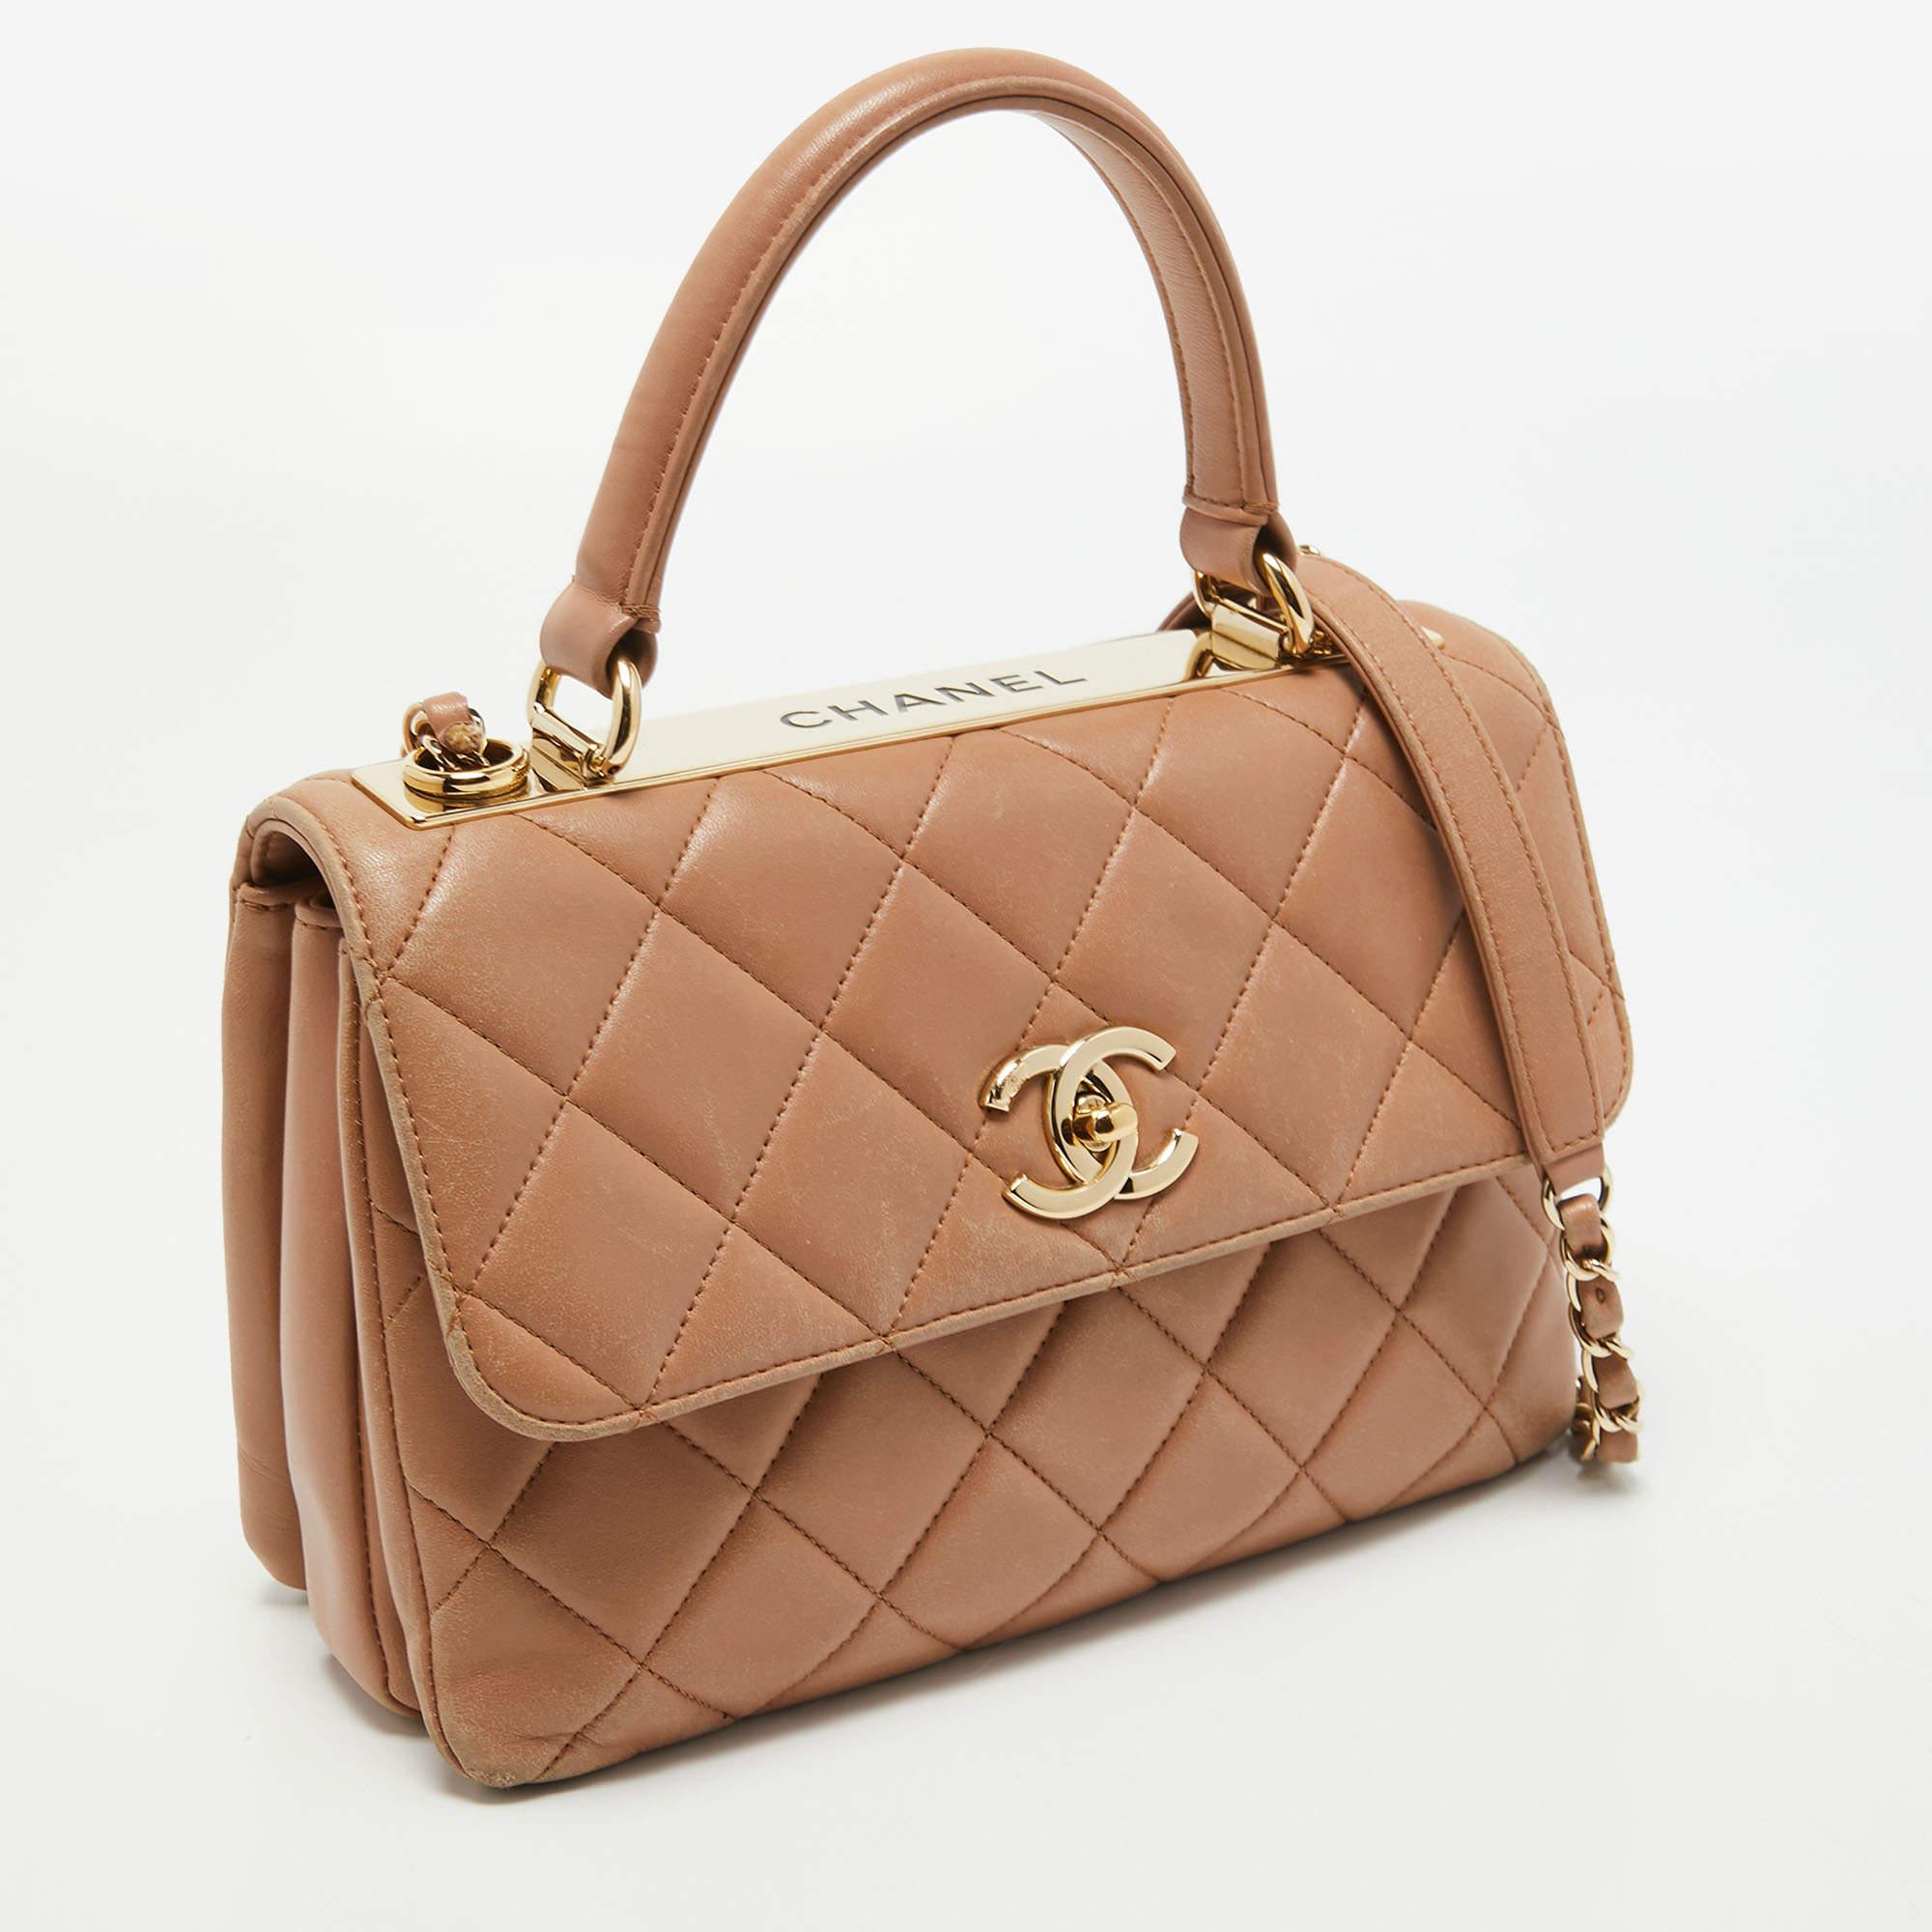 This Trendy CC Flap bag from the House of Chanel will surely add sparks of luxury to your wardrobe. Embellished with the iconic CC lock on the front, this bag is crafted from beige quilted leather into a chic silhouette. It is added with a chain